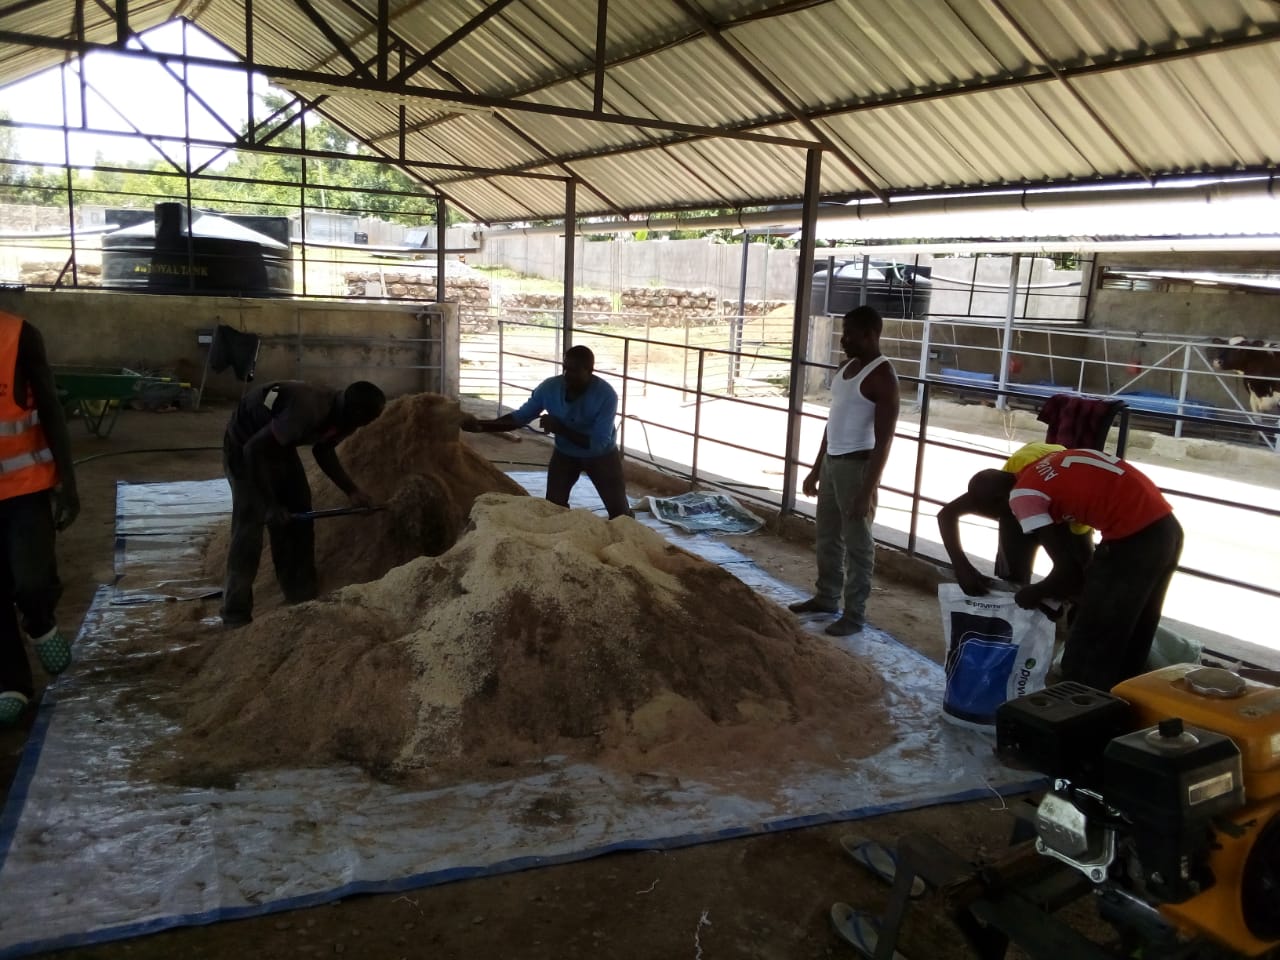 Mixing feed ingredients